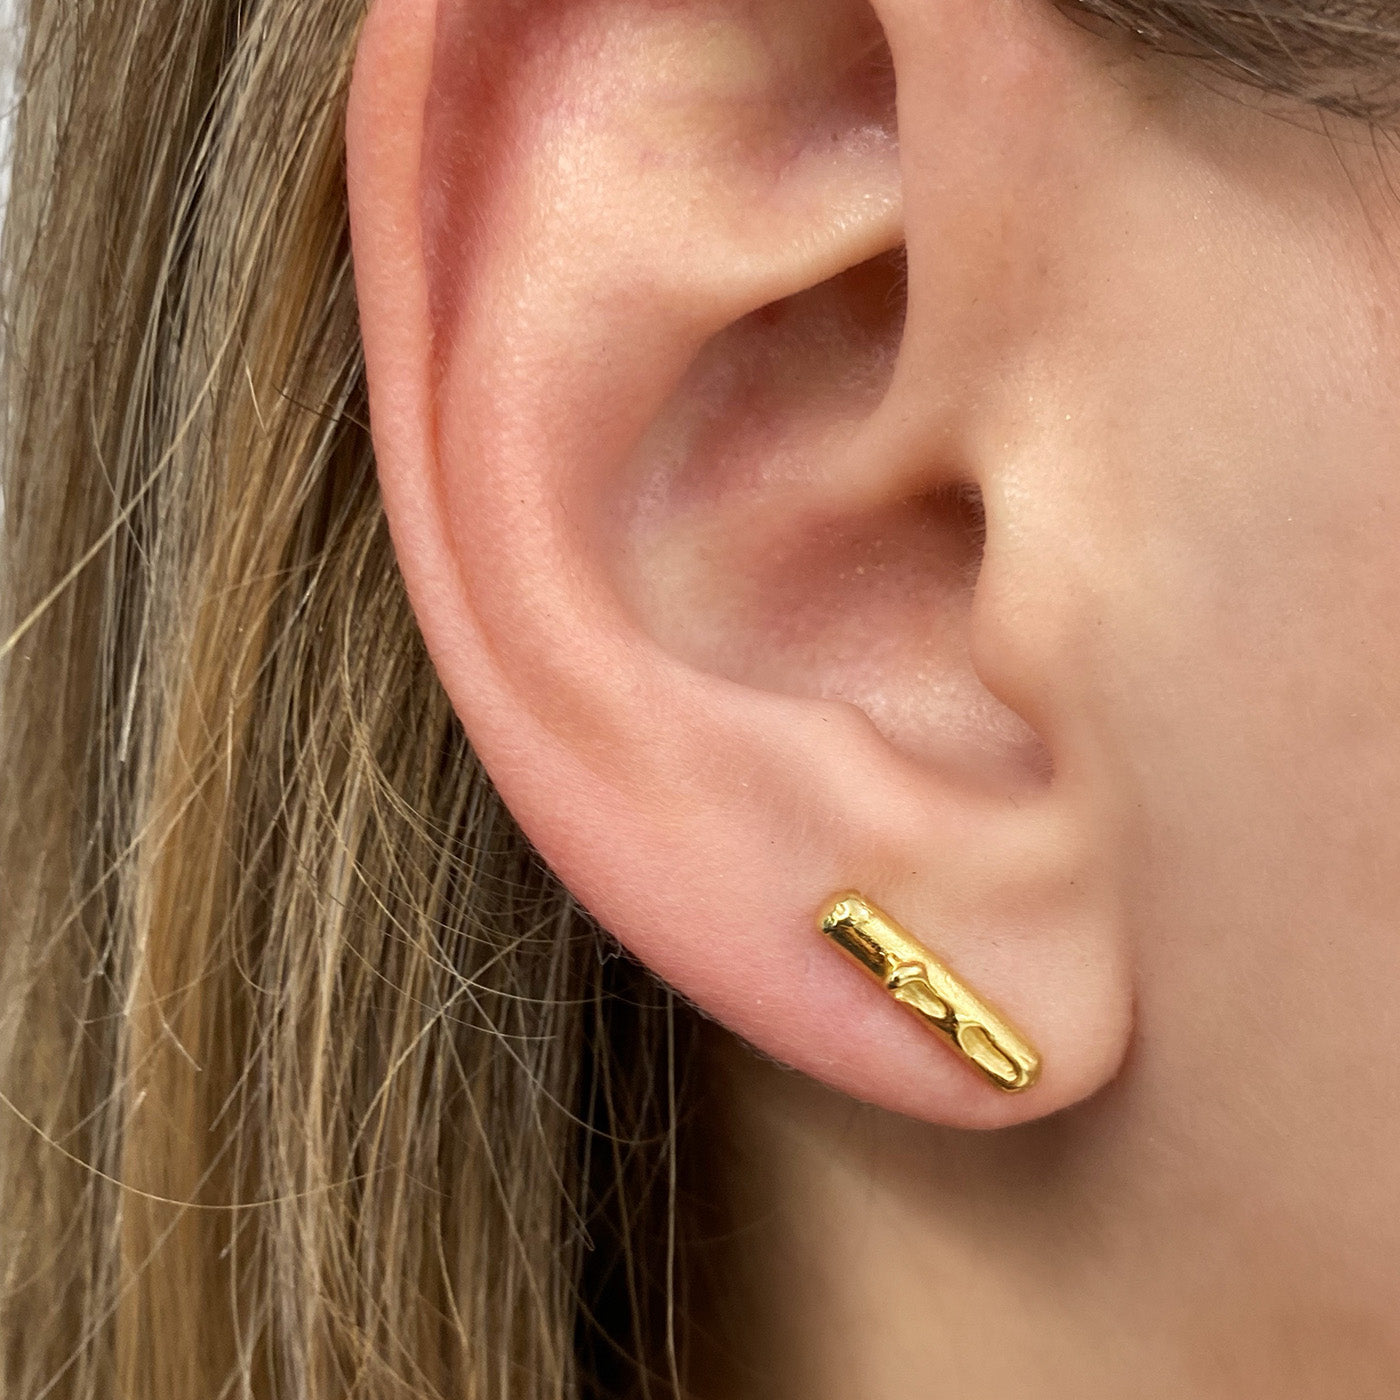 earrings cenote bar silver 18 ct gold plated on the model innan jewellery independent atelier berlin